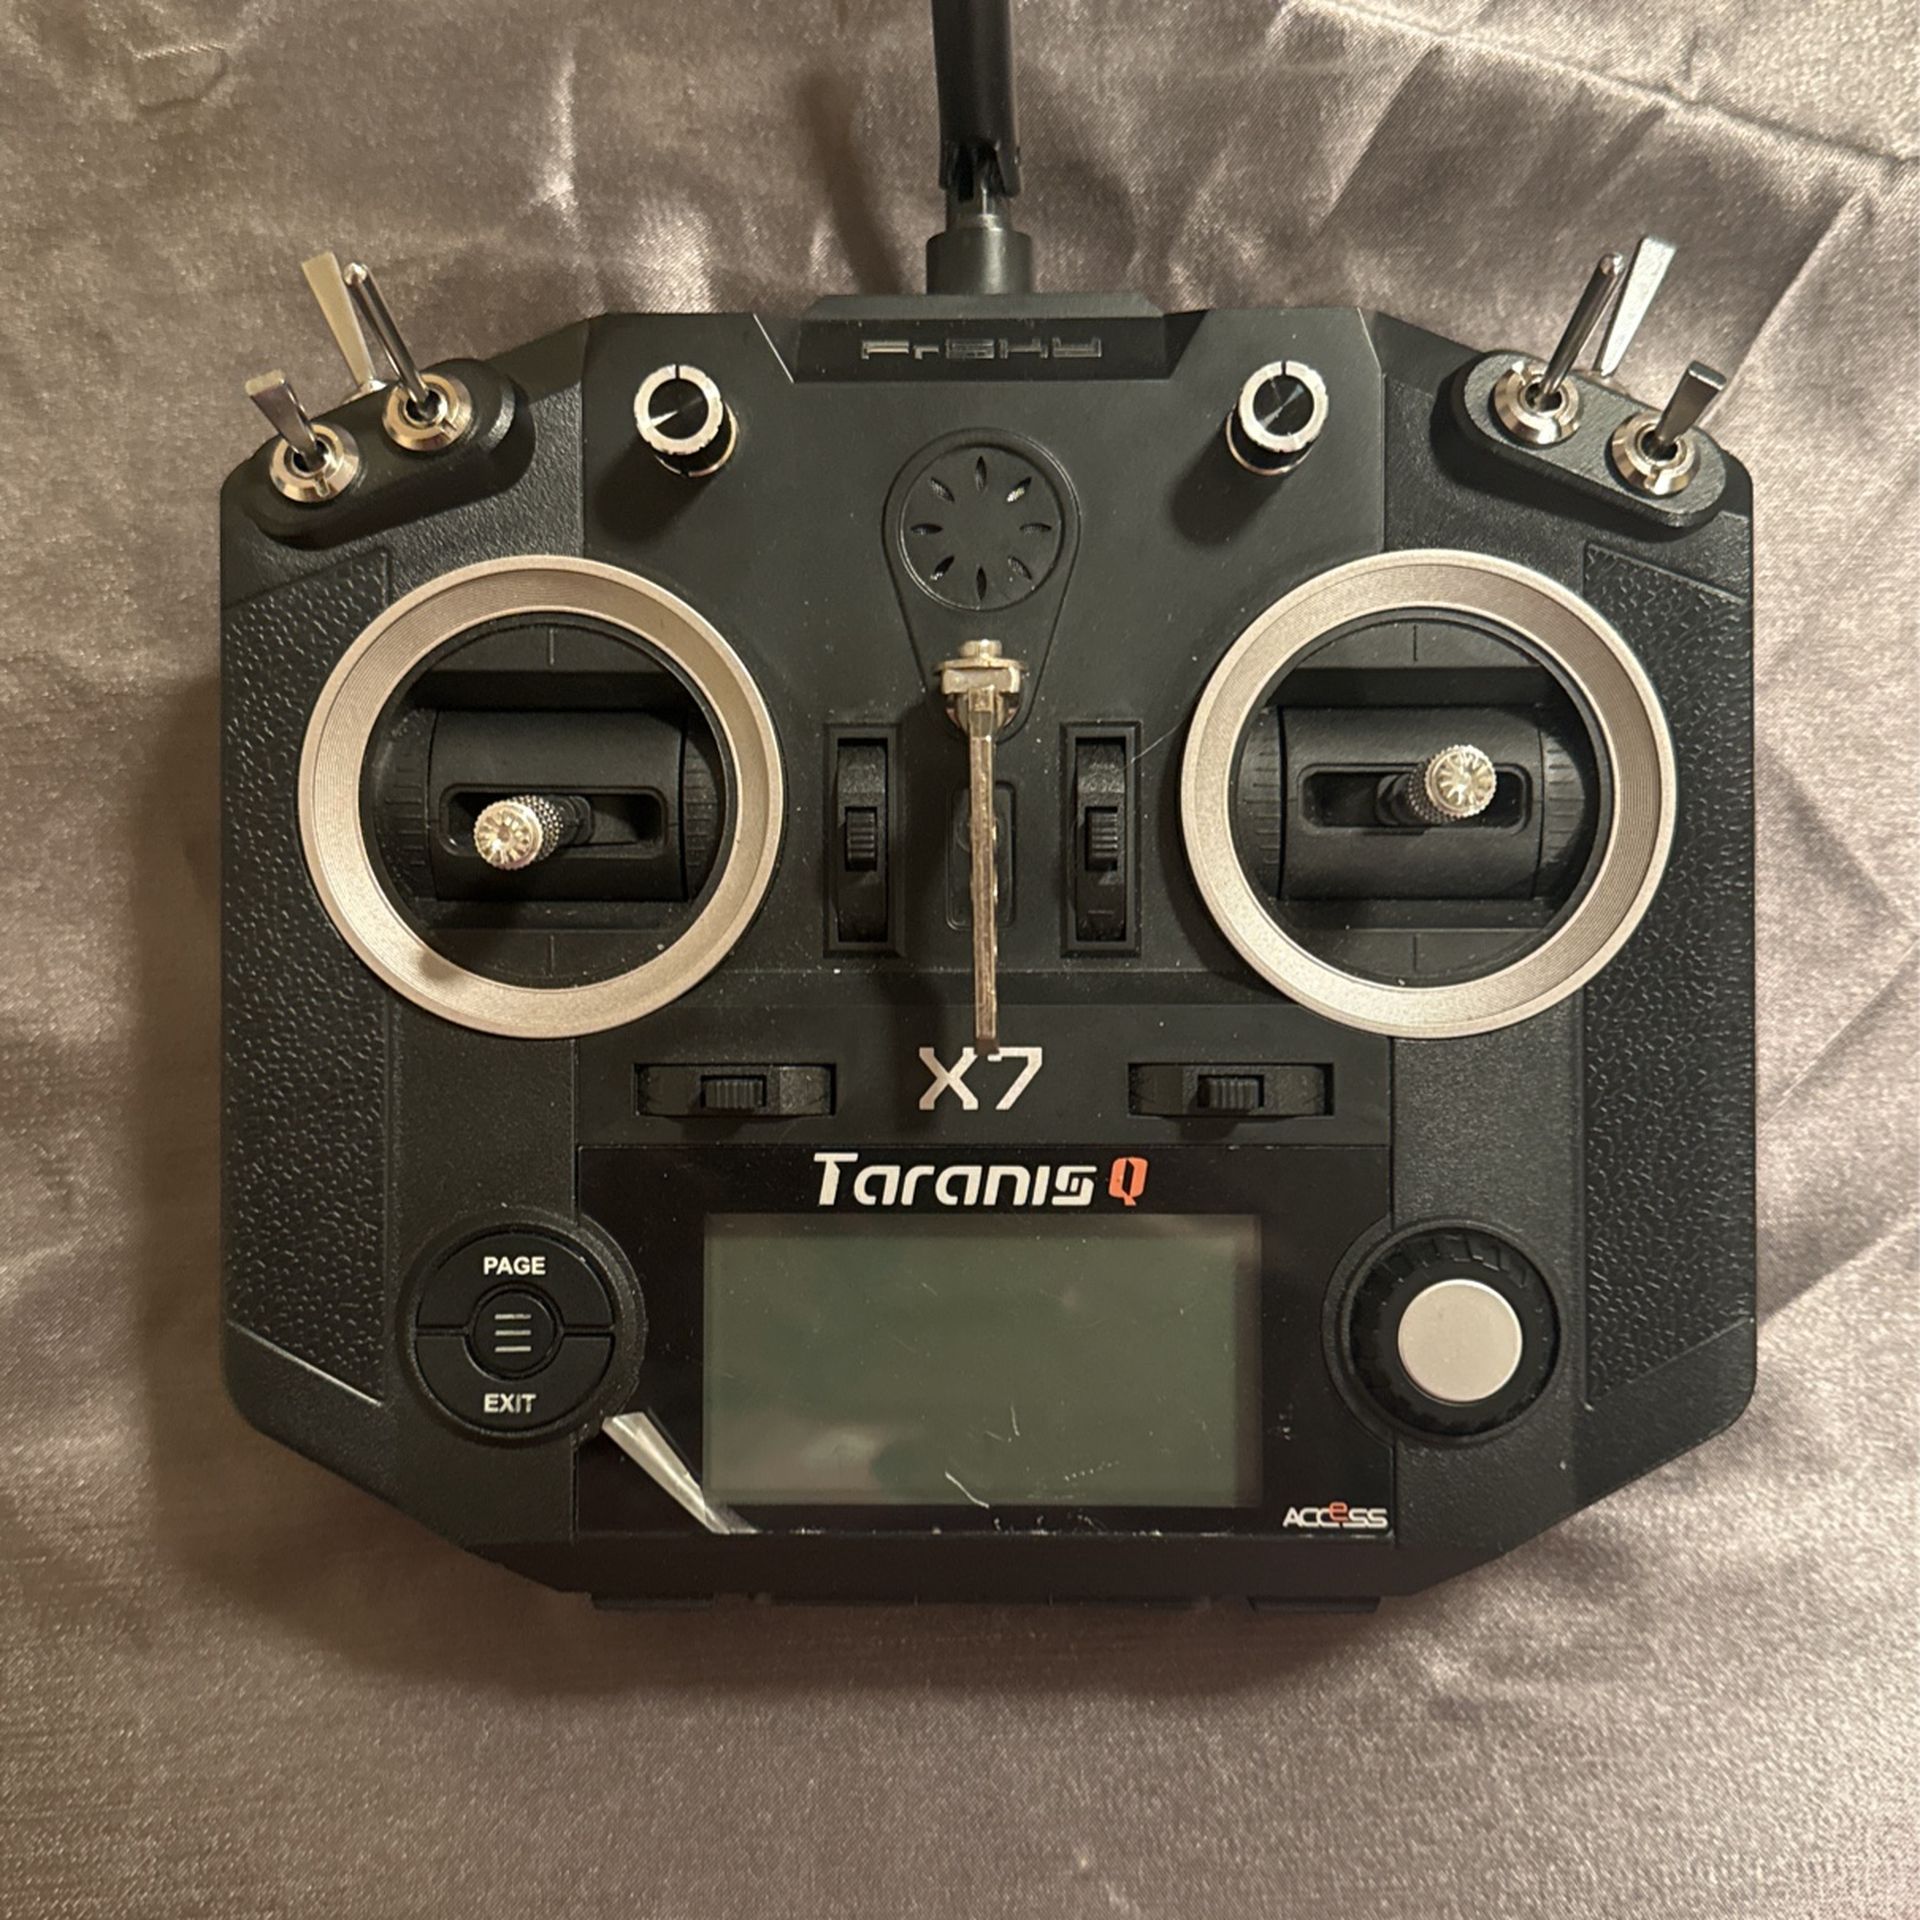 Taranis Qx7 With Access And XJT Modules